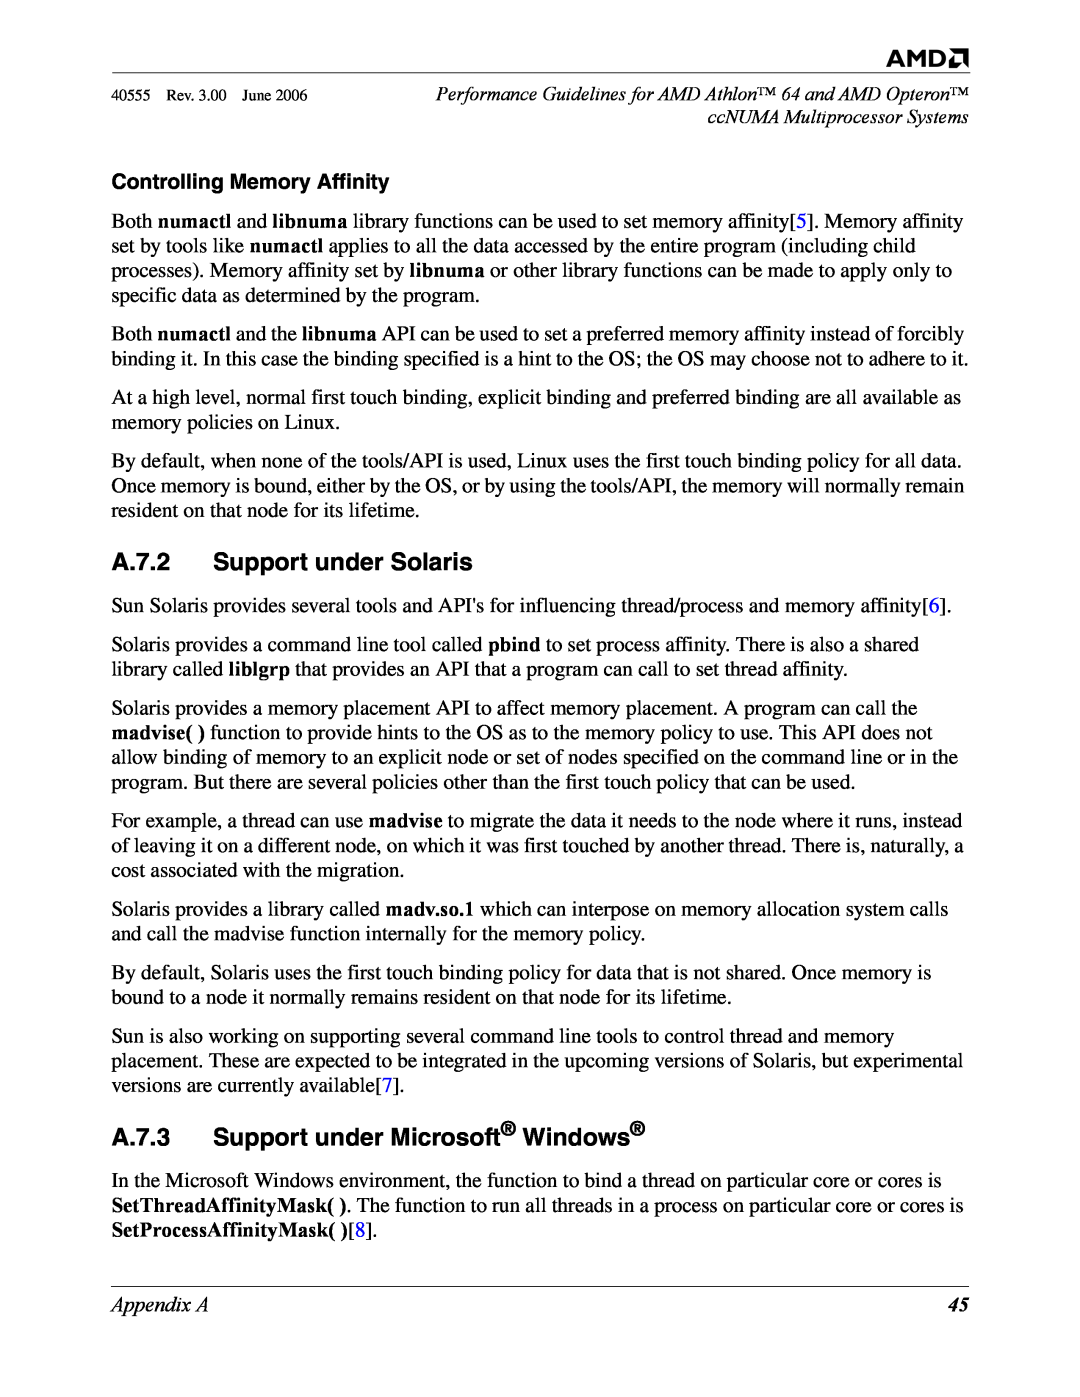 AMD 64 manual A.7.2 Support under Solaris, A.7.3 Support under Microsoft Windows, Controlling Memory Affinity, Appendix A 